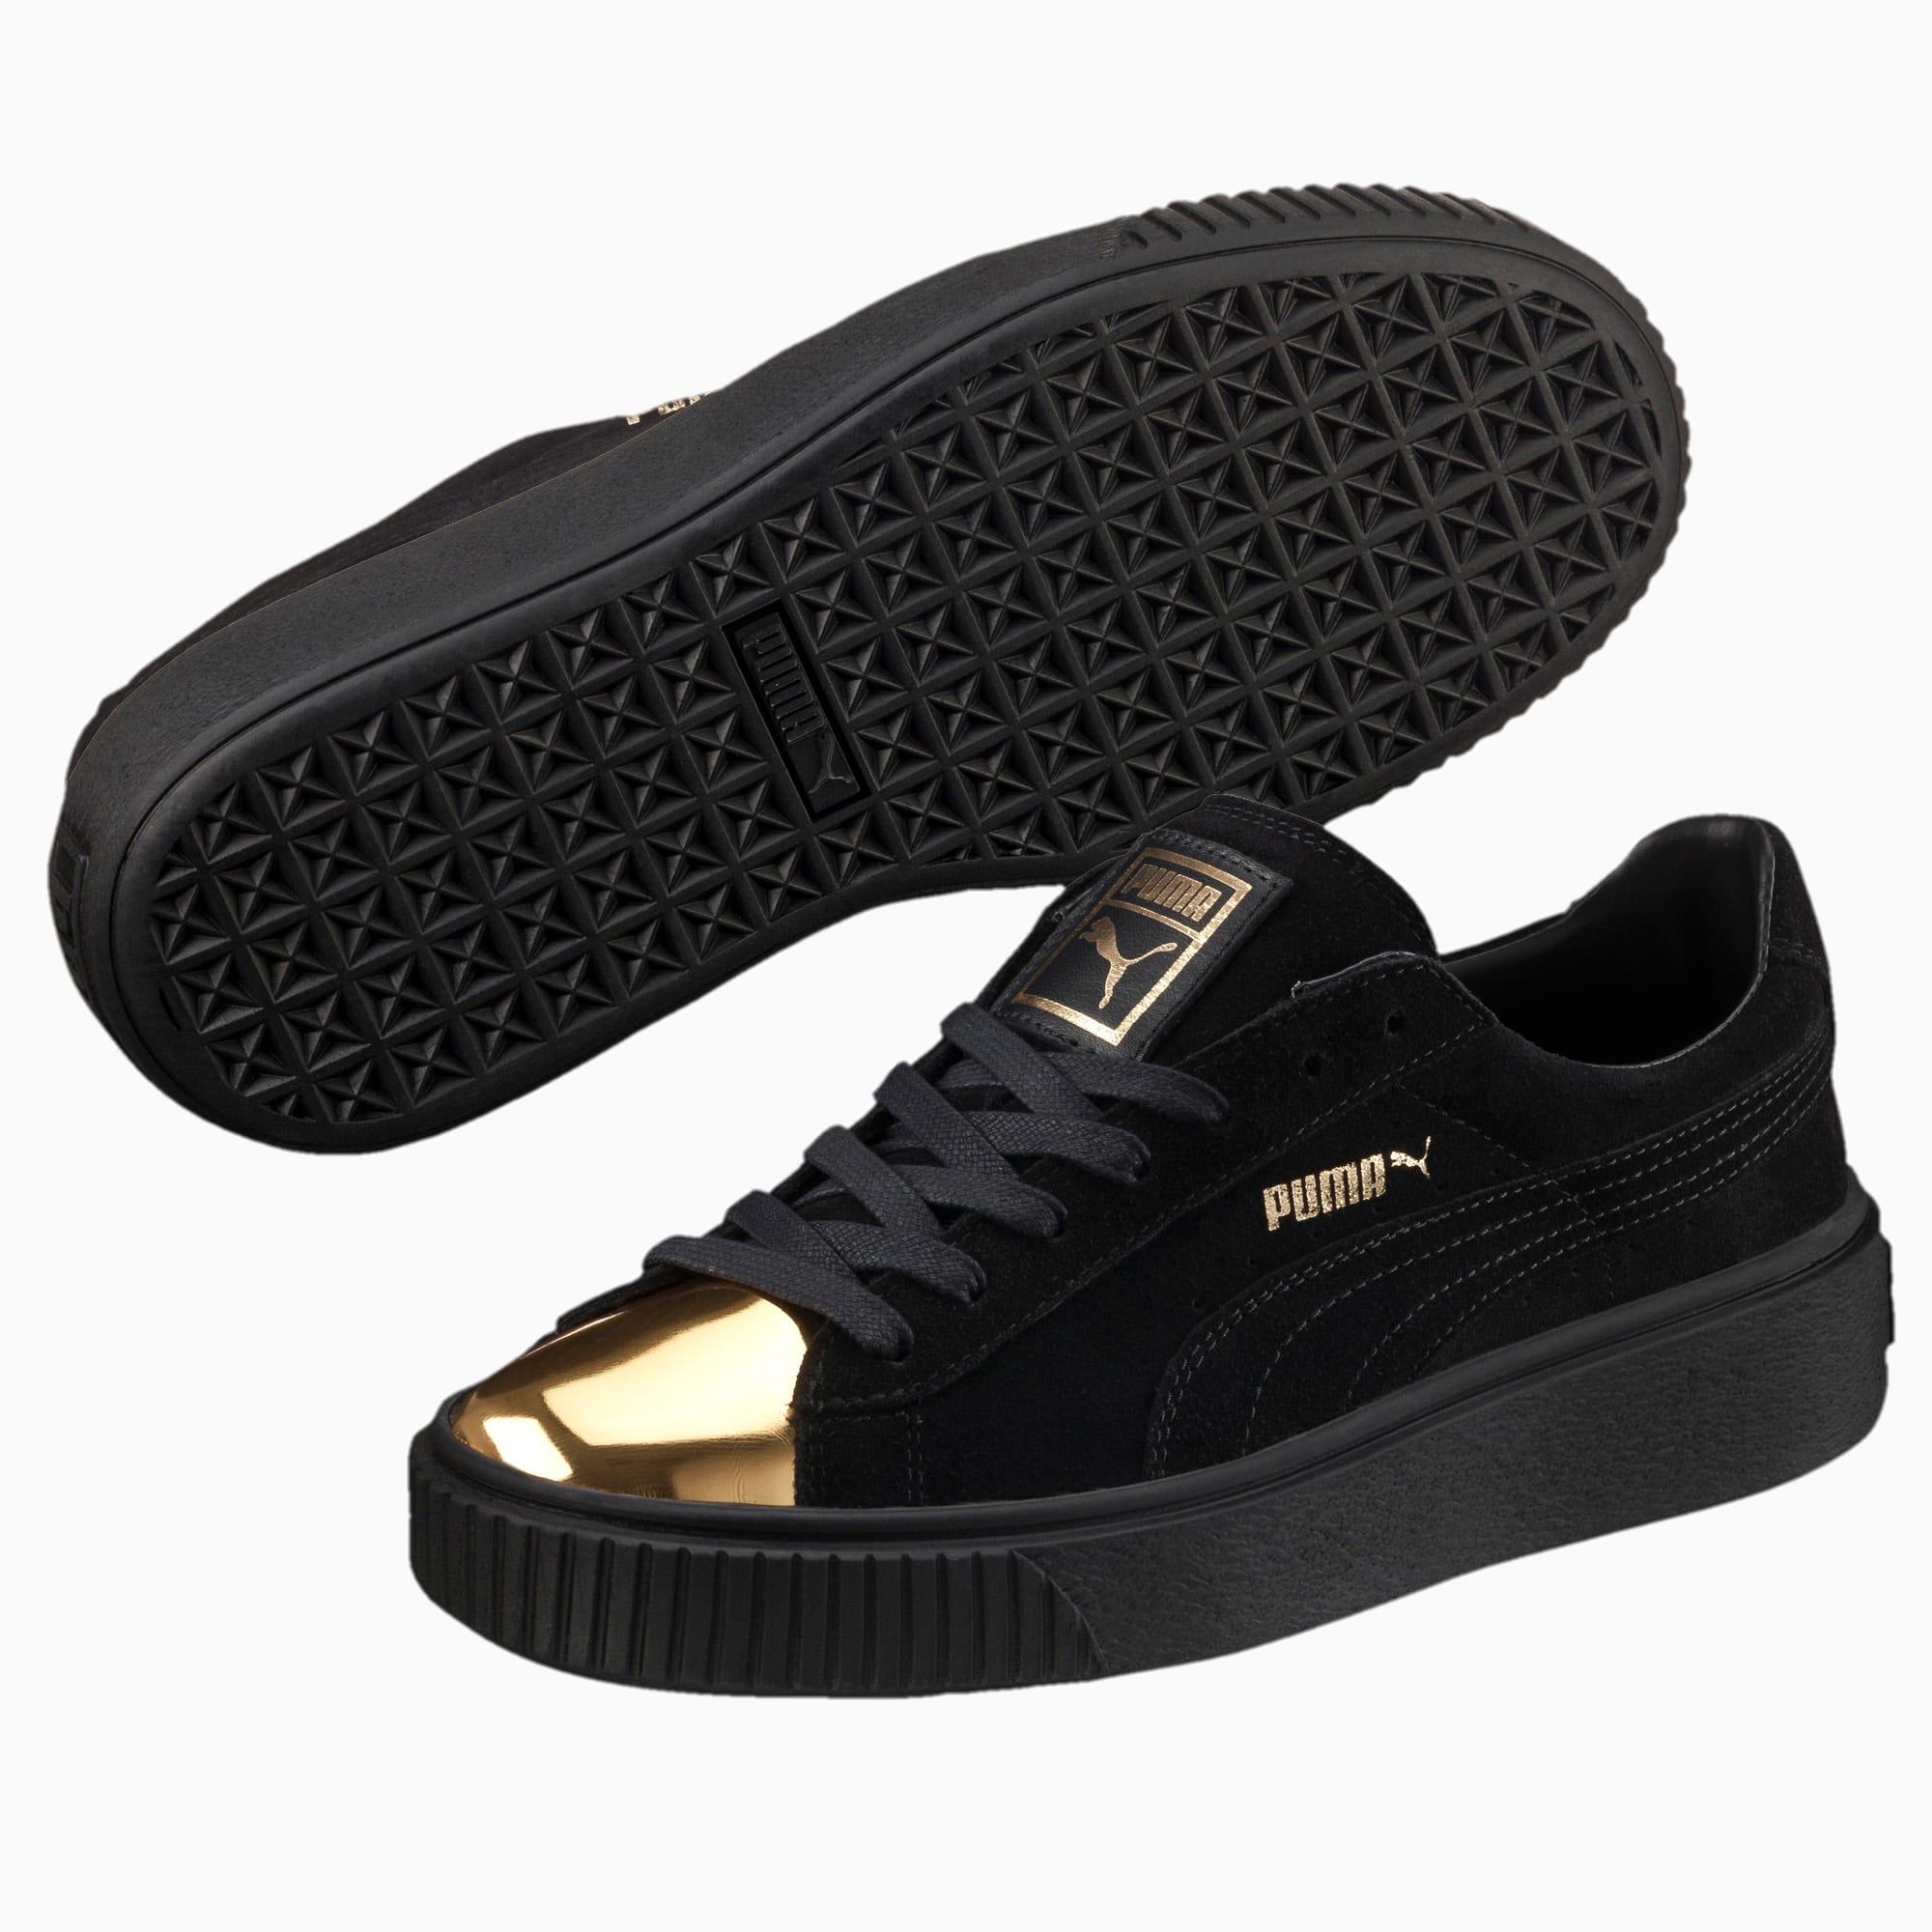 puma shoes with gold toe